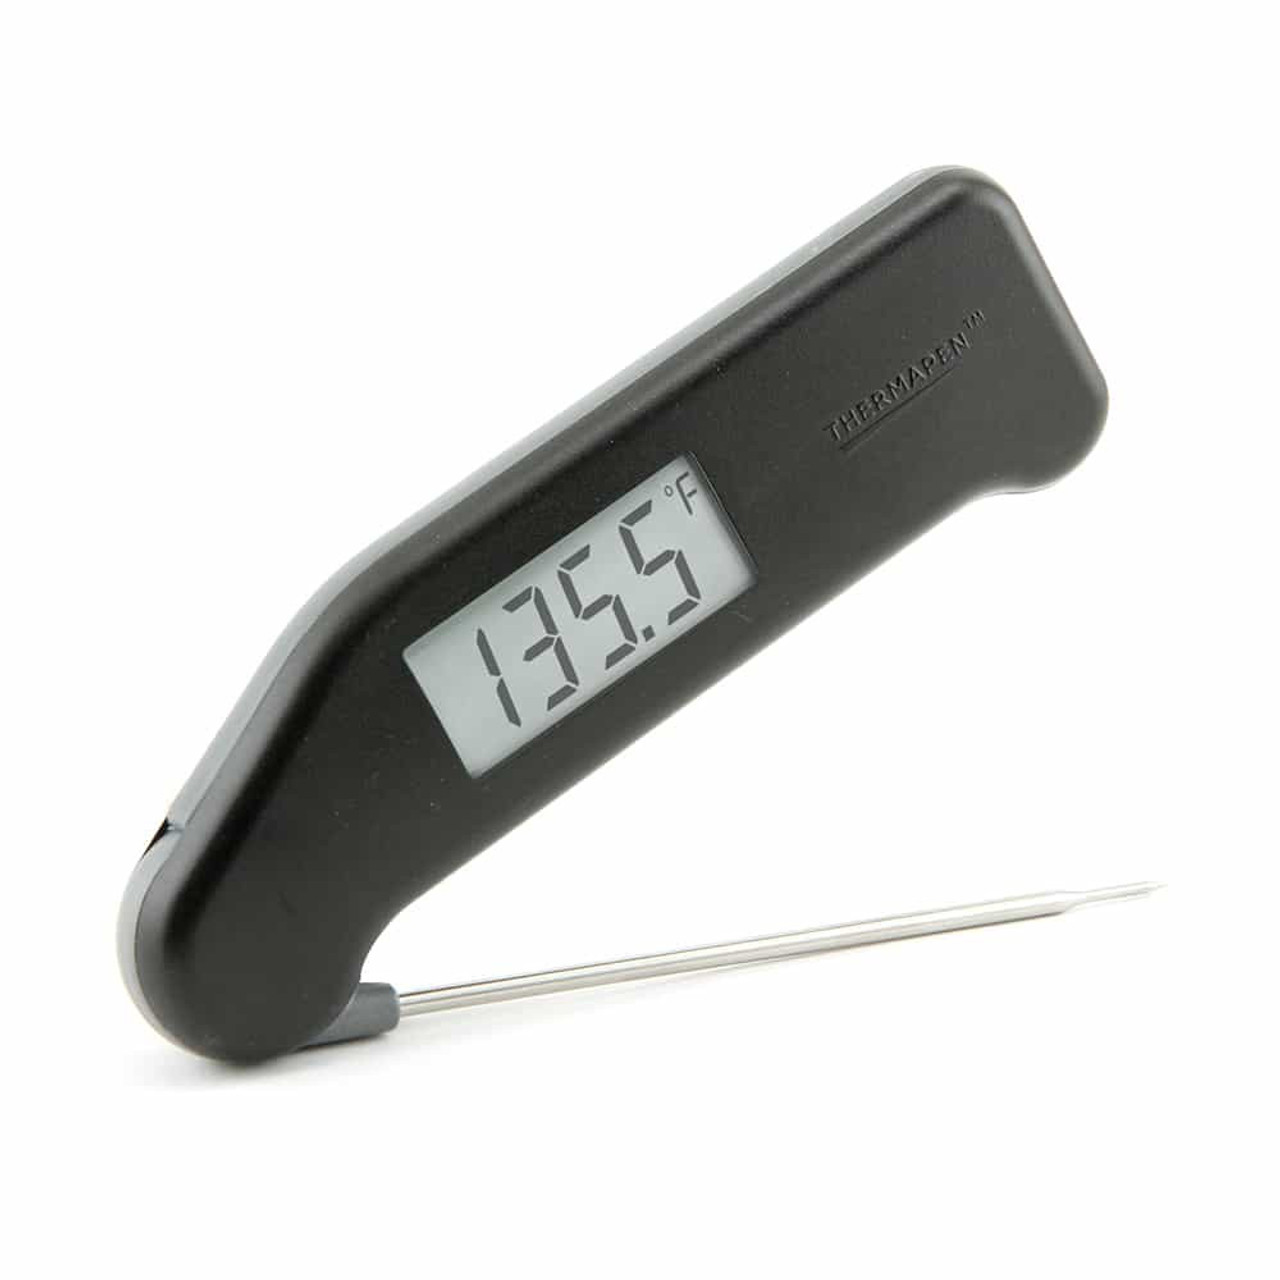 ThermoWorks' latest Thermapen can measure food temperature in